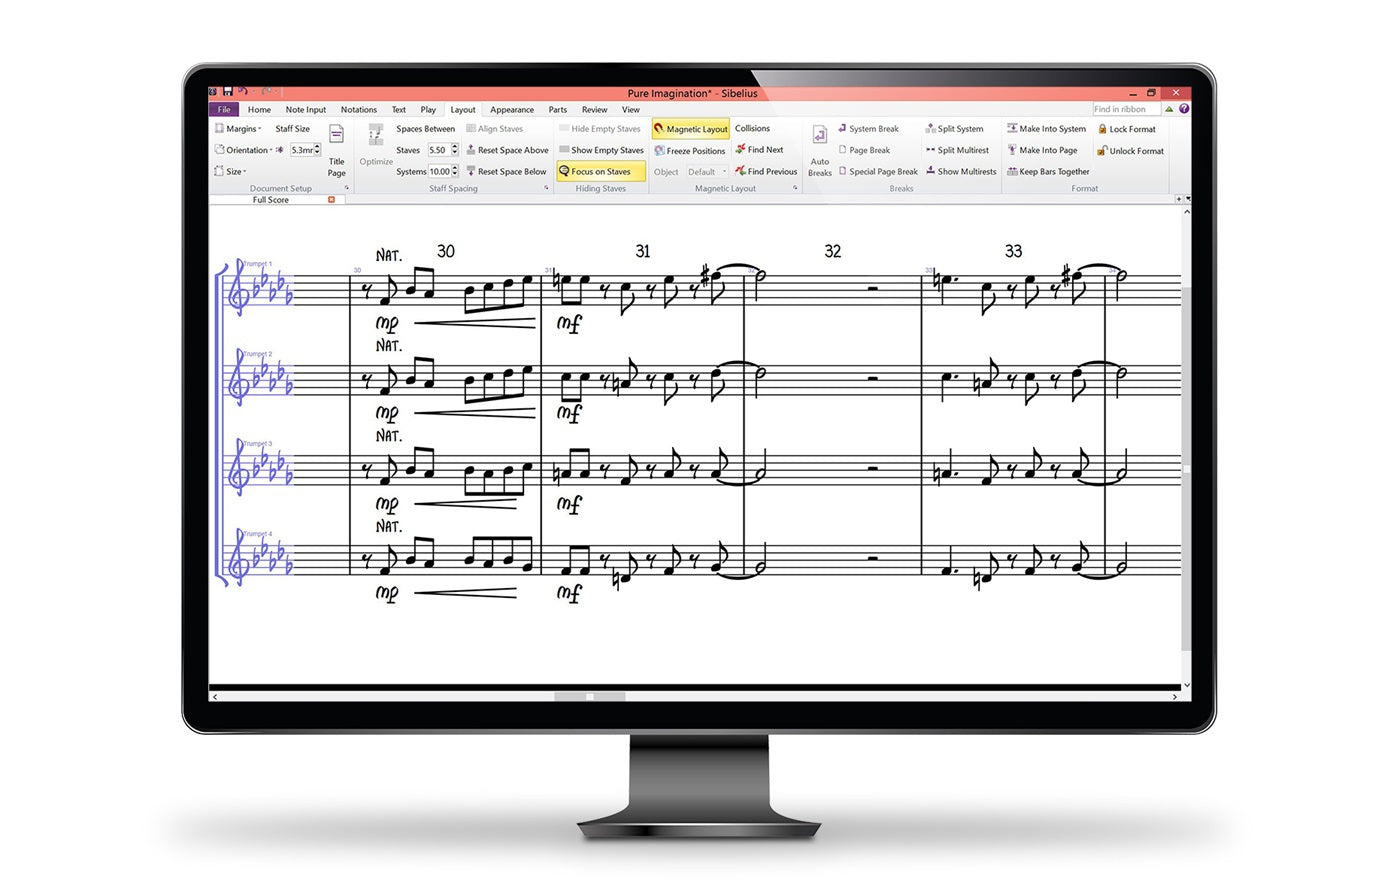 Avid Sibelius Upgrade and Support Plan for 1 year for Education